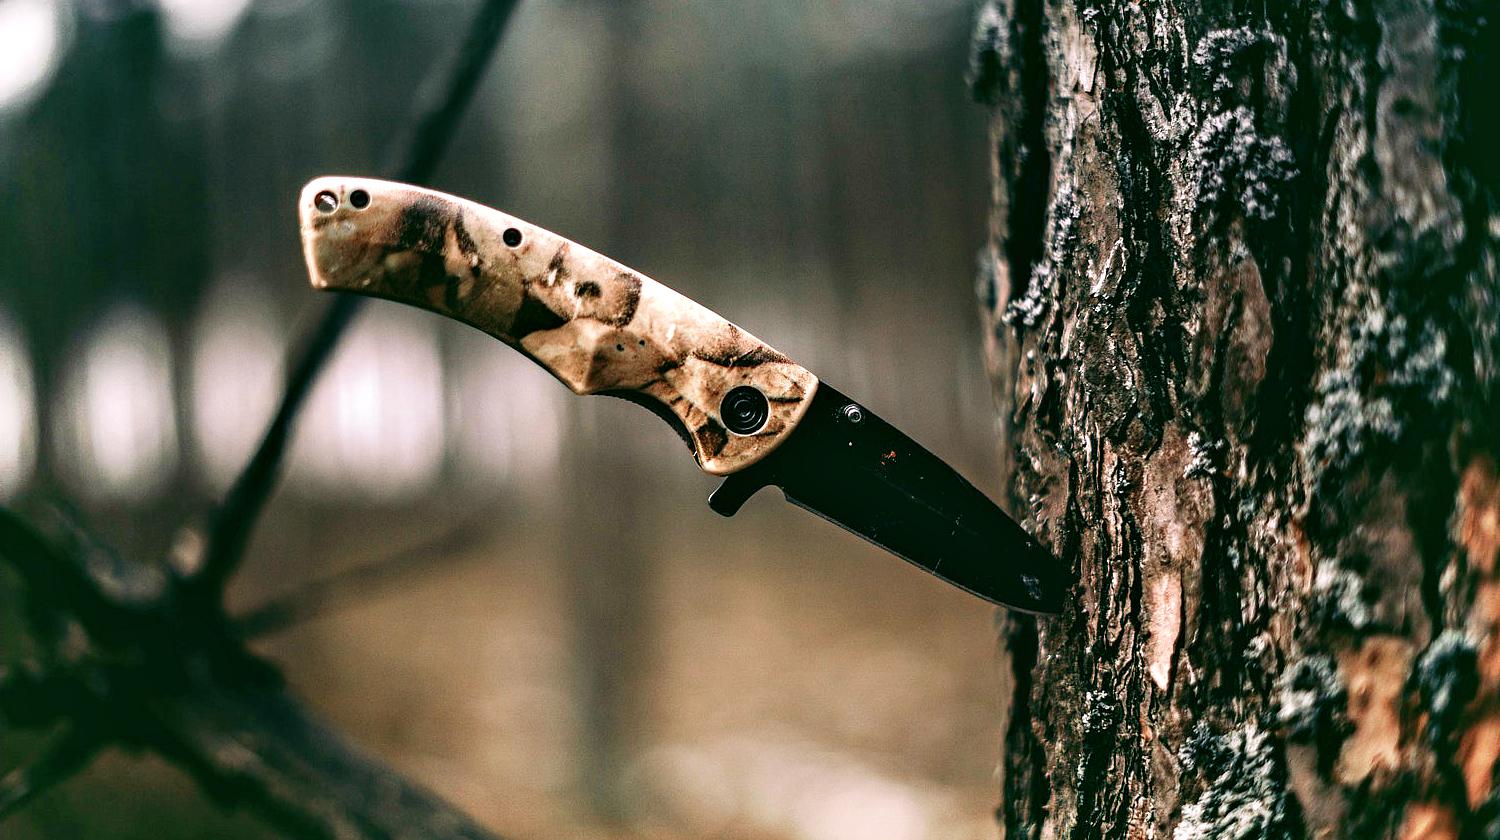 Feature | Camping knife in the woods | How To Baton Wood With A Survival Knife [Video]